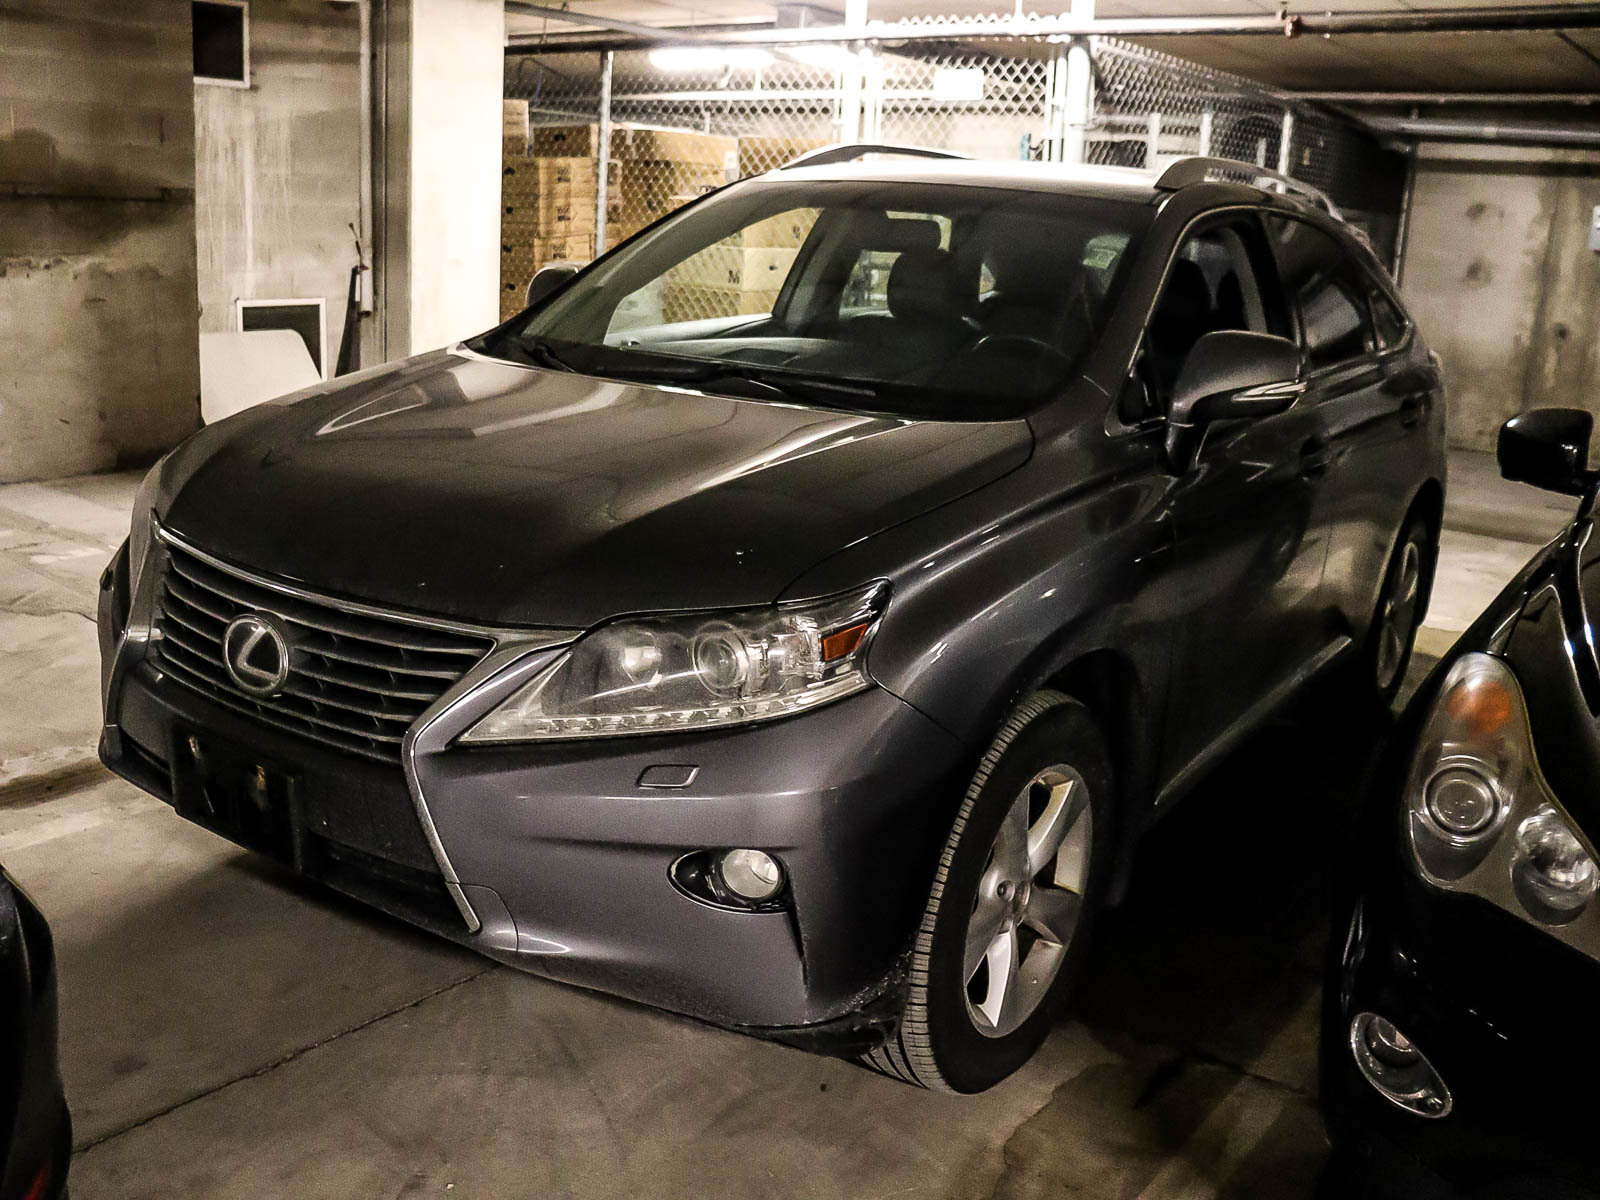 2013 Lexus RX 350 SUNROOF|LEATHER|AS IS|